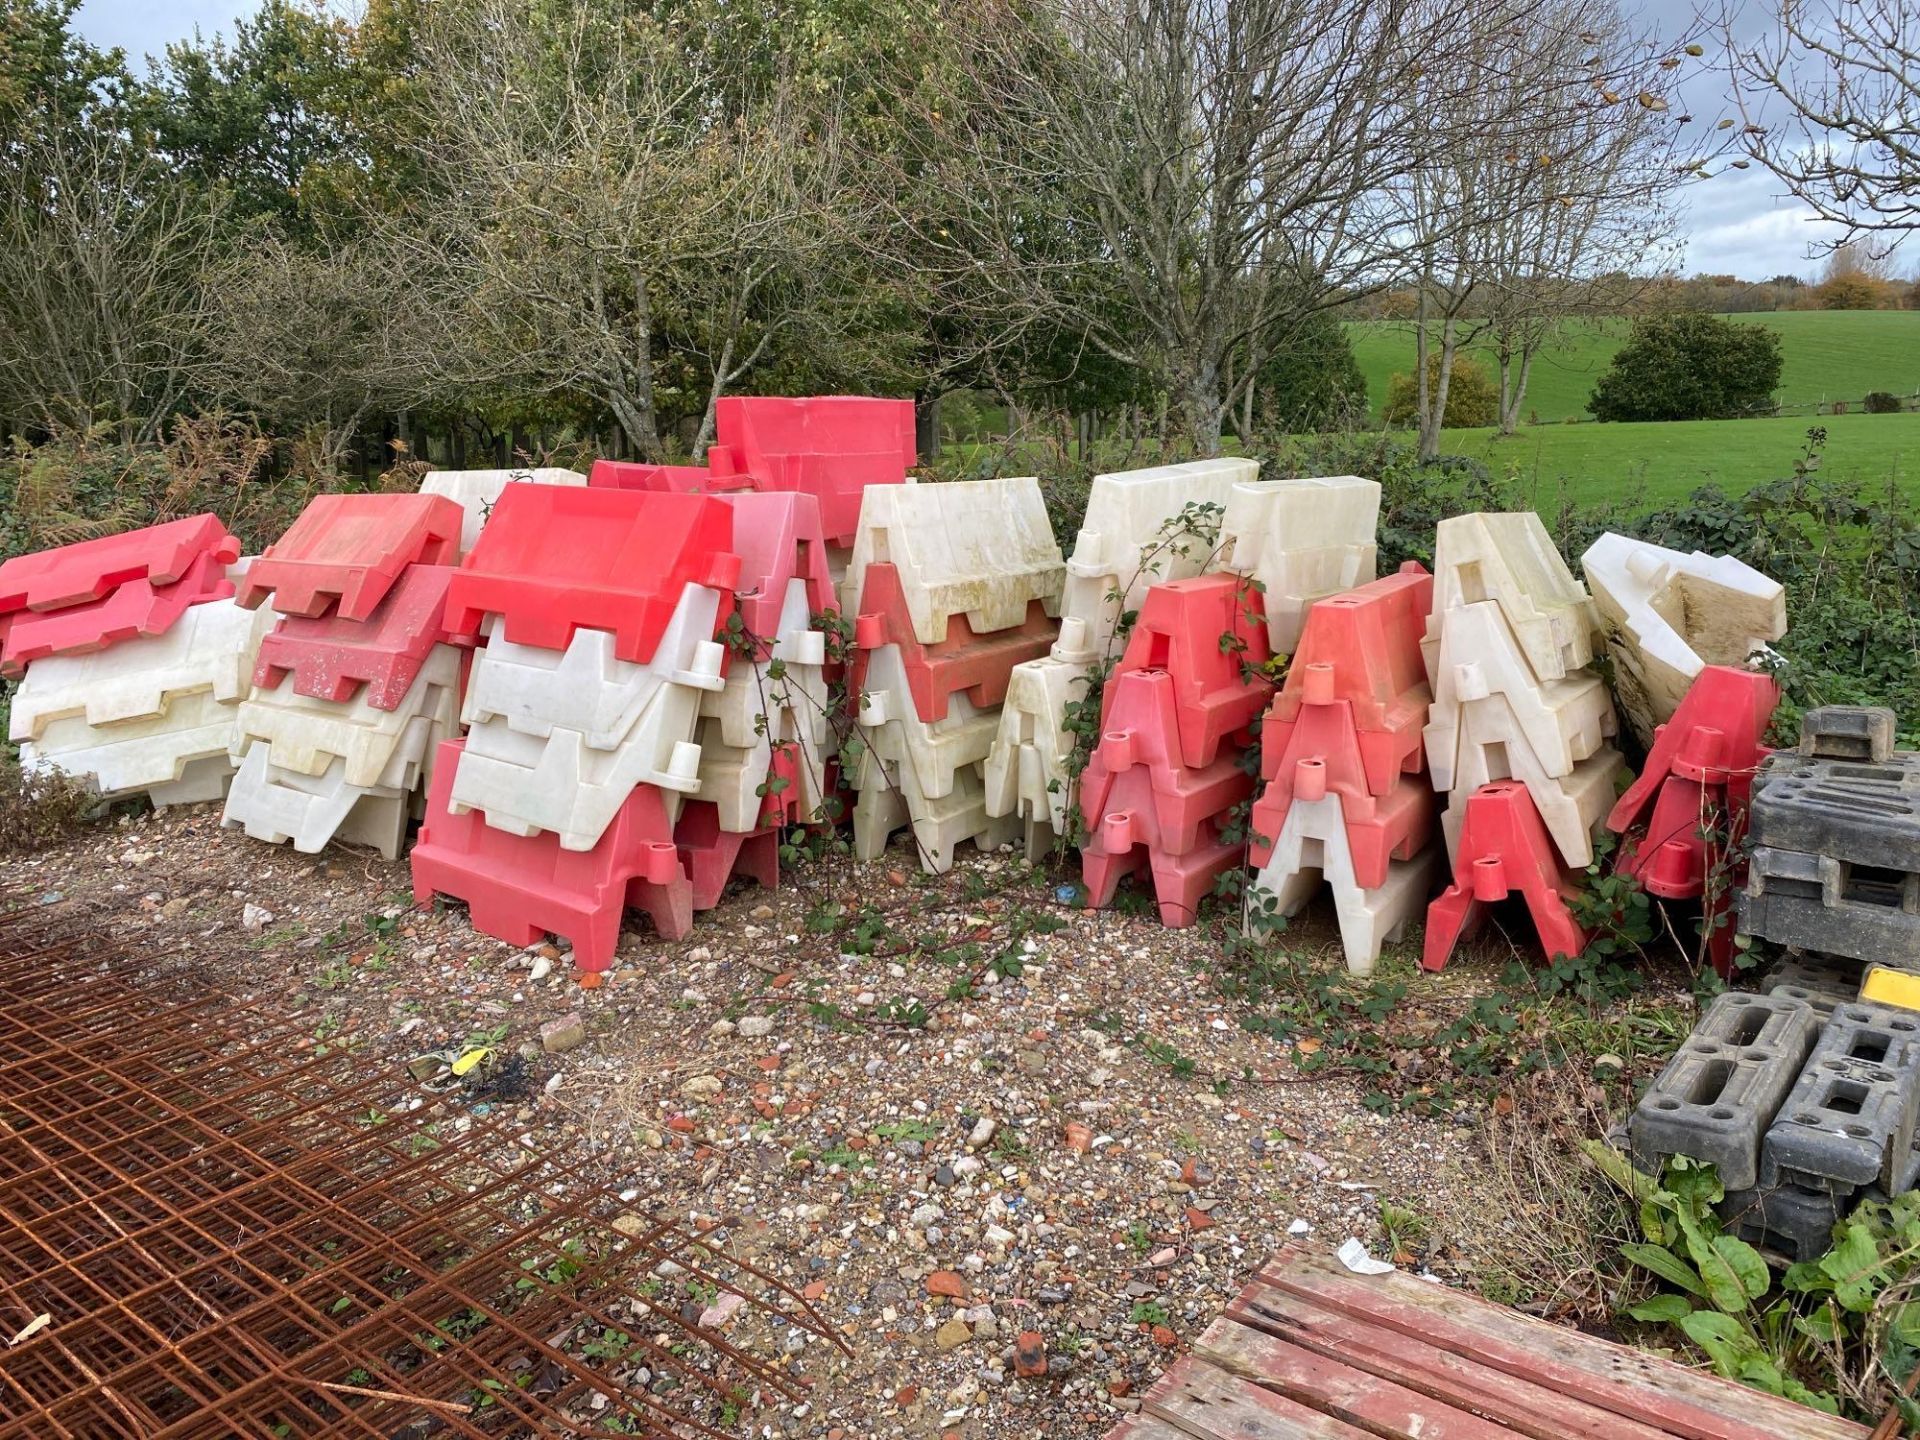 Approximately 80 red and white road barriers